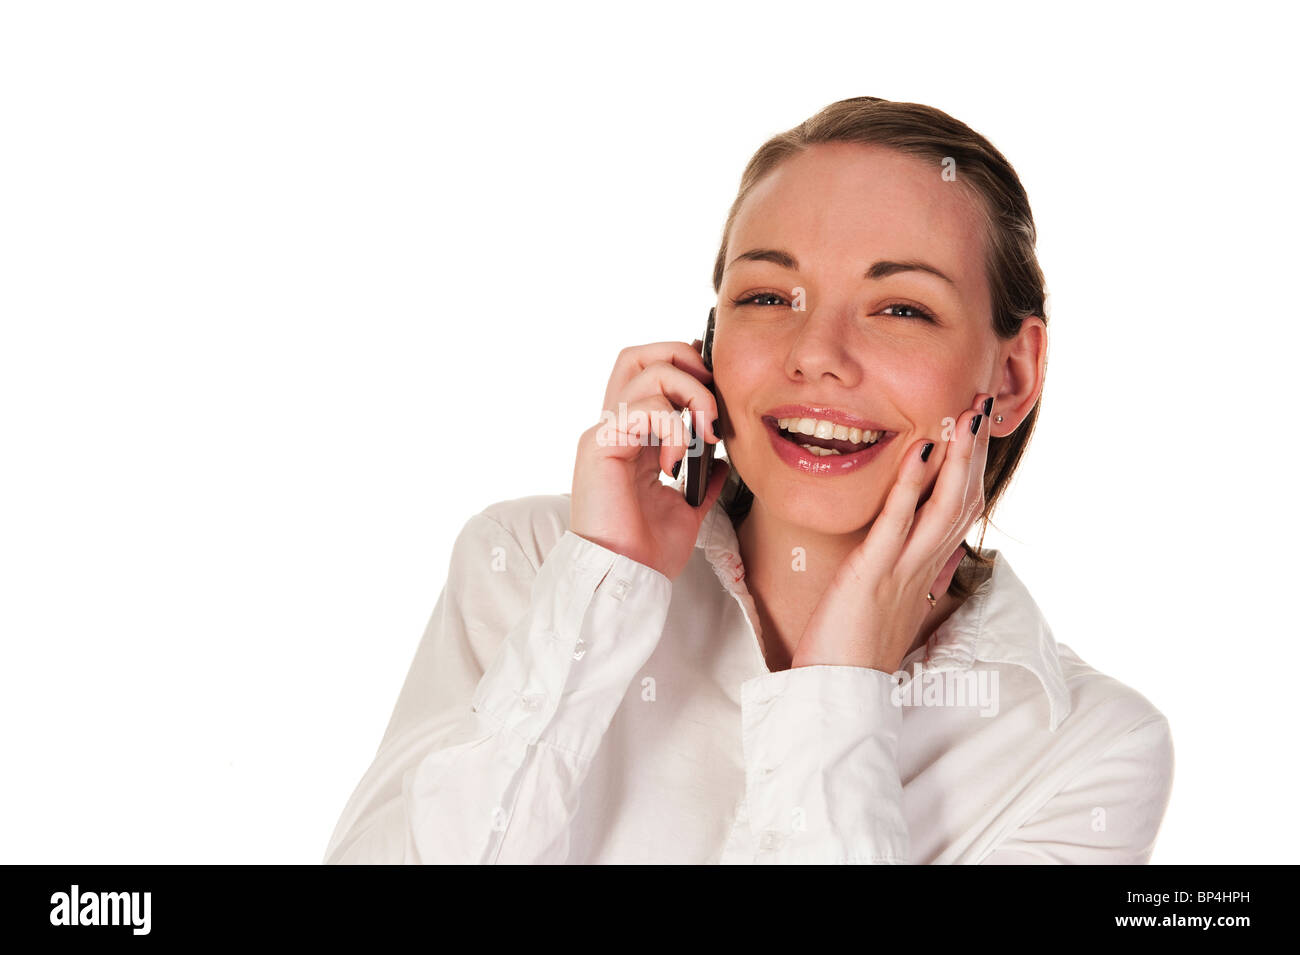 Happy girl speaking on the telephone, seen against white background Stock Photo